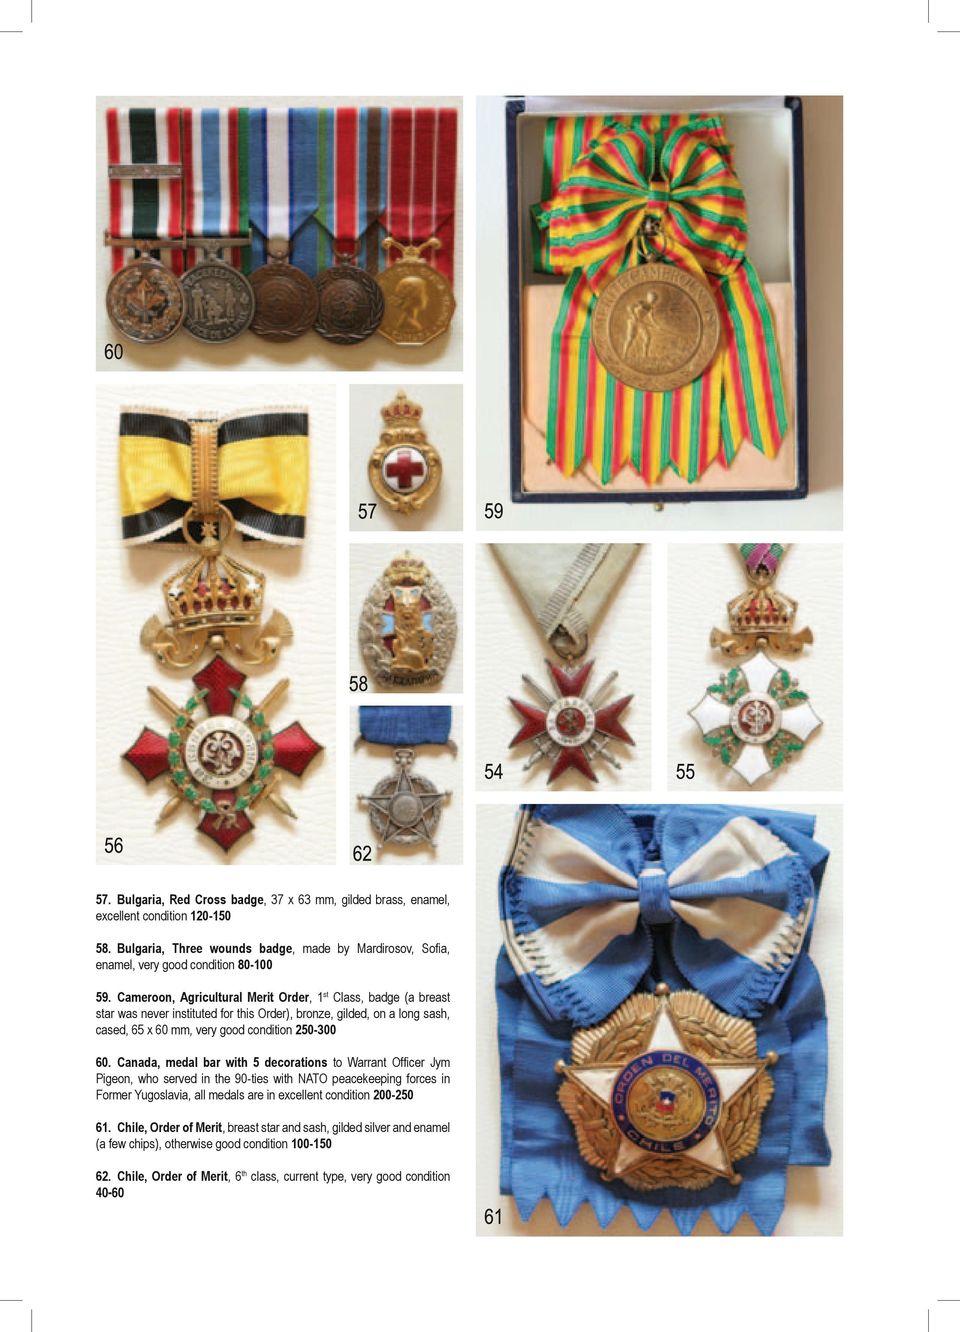 Canada, medal bar with 5 decorations to Warrant Officer Jym Pigeon, who served in the 90-ties with NATO peacekeeping forces in Former Yugoslavia, all medals are in excellent condition 200-250